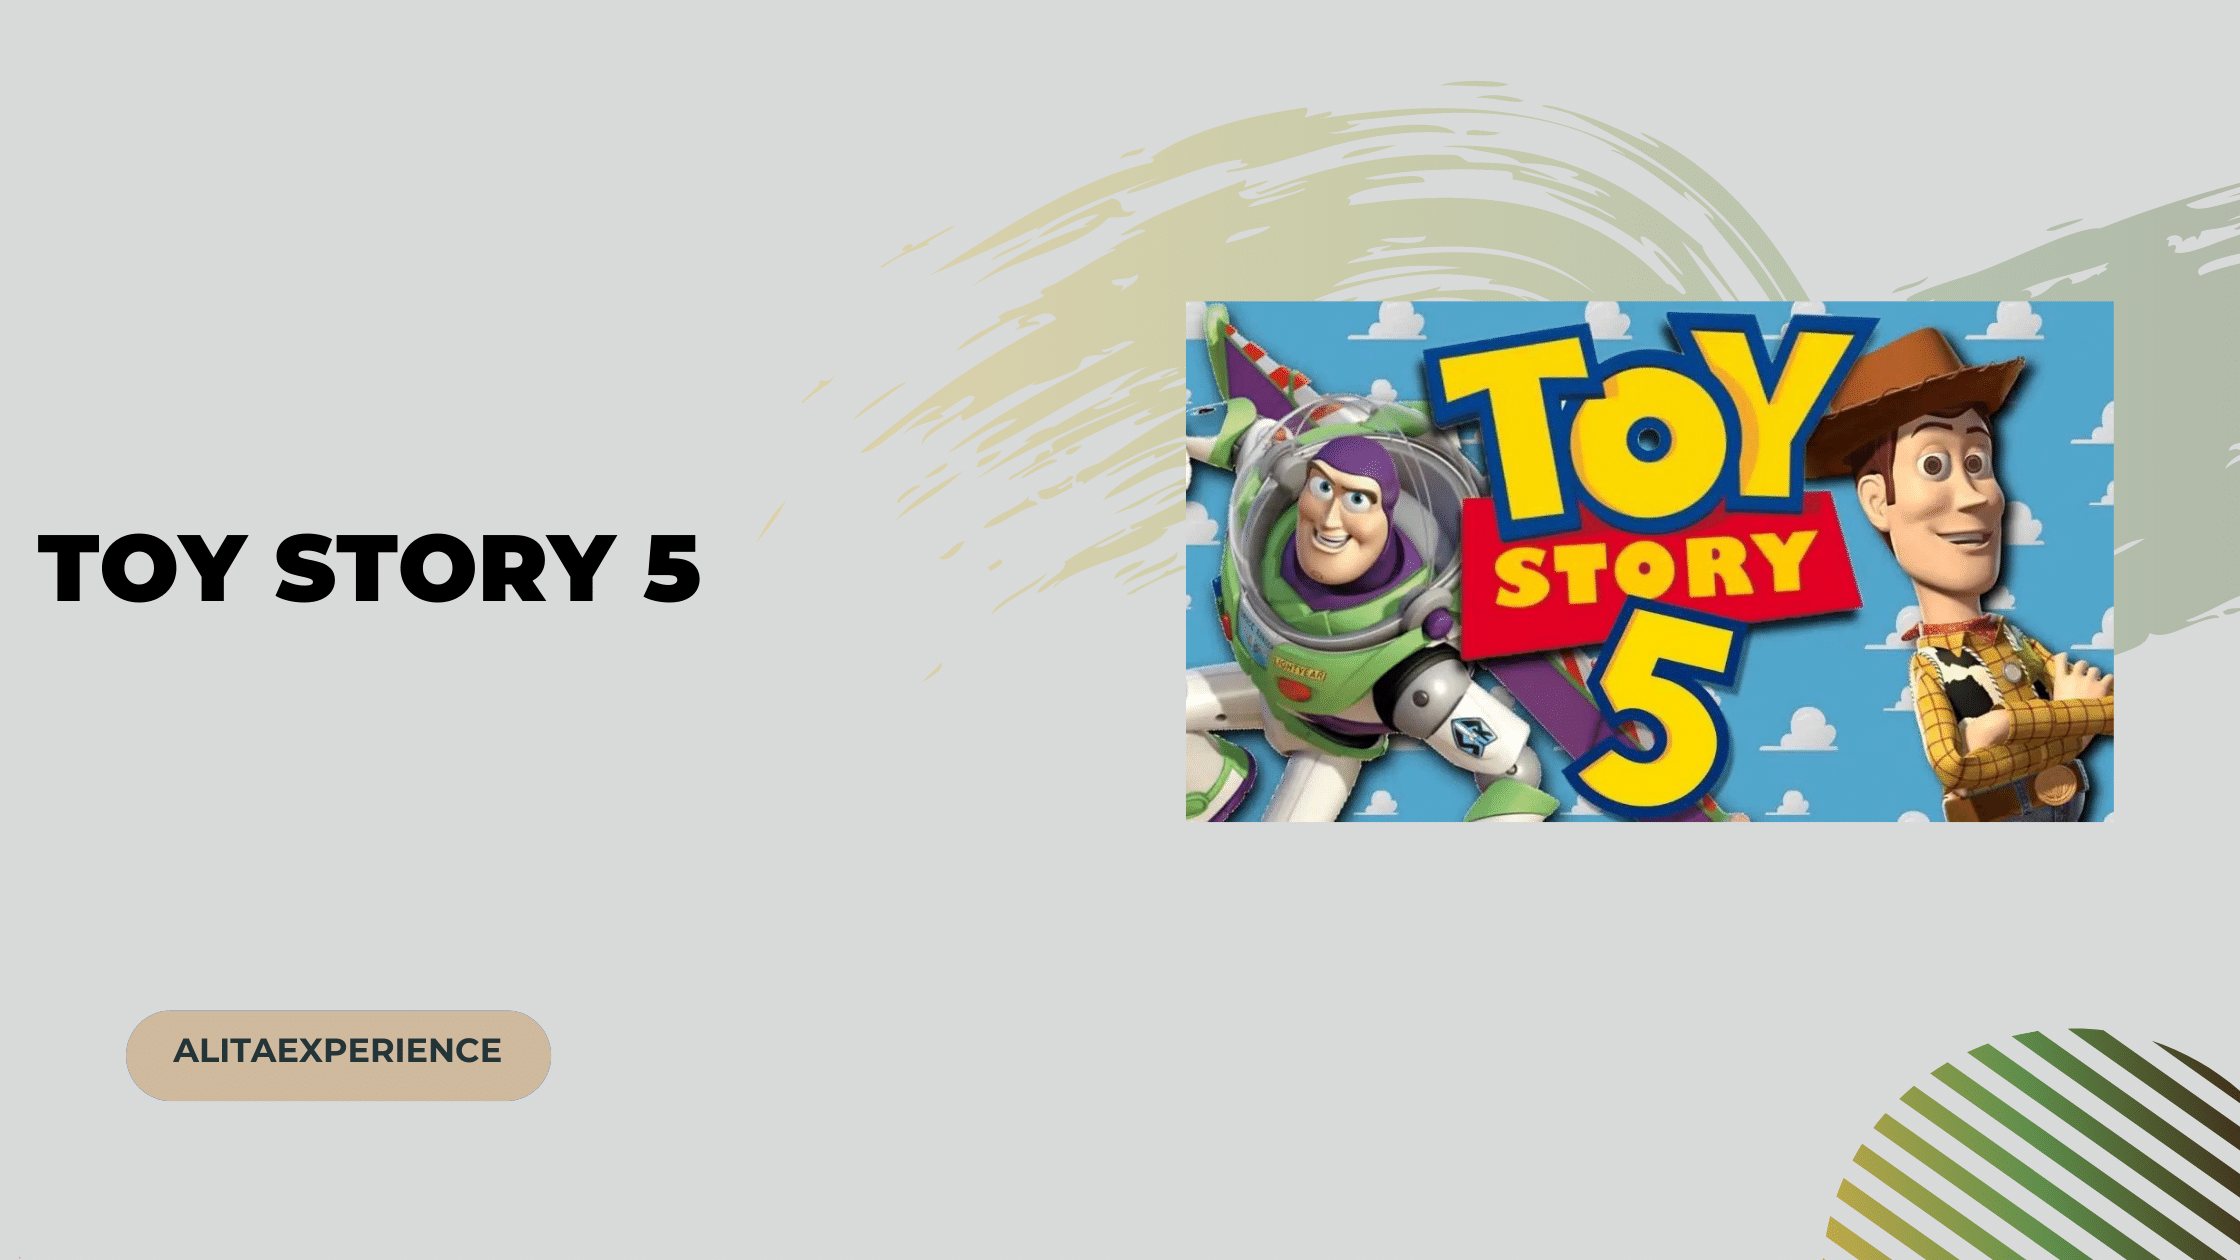 Upcoming Movies - Toy Story 5 is coming June 16th 2023! 🎥🍿